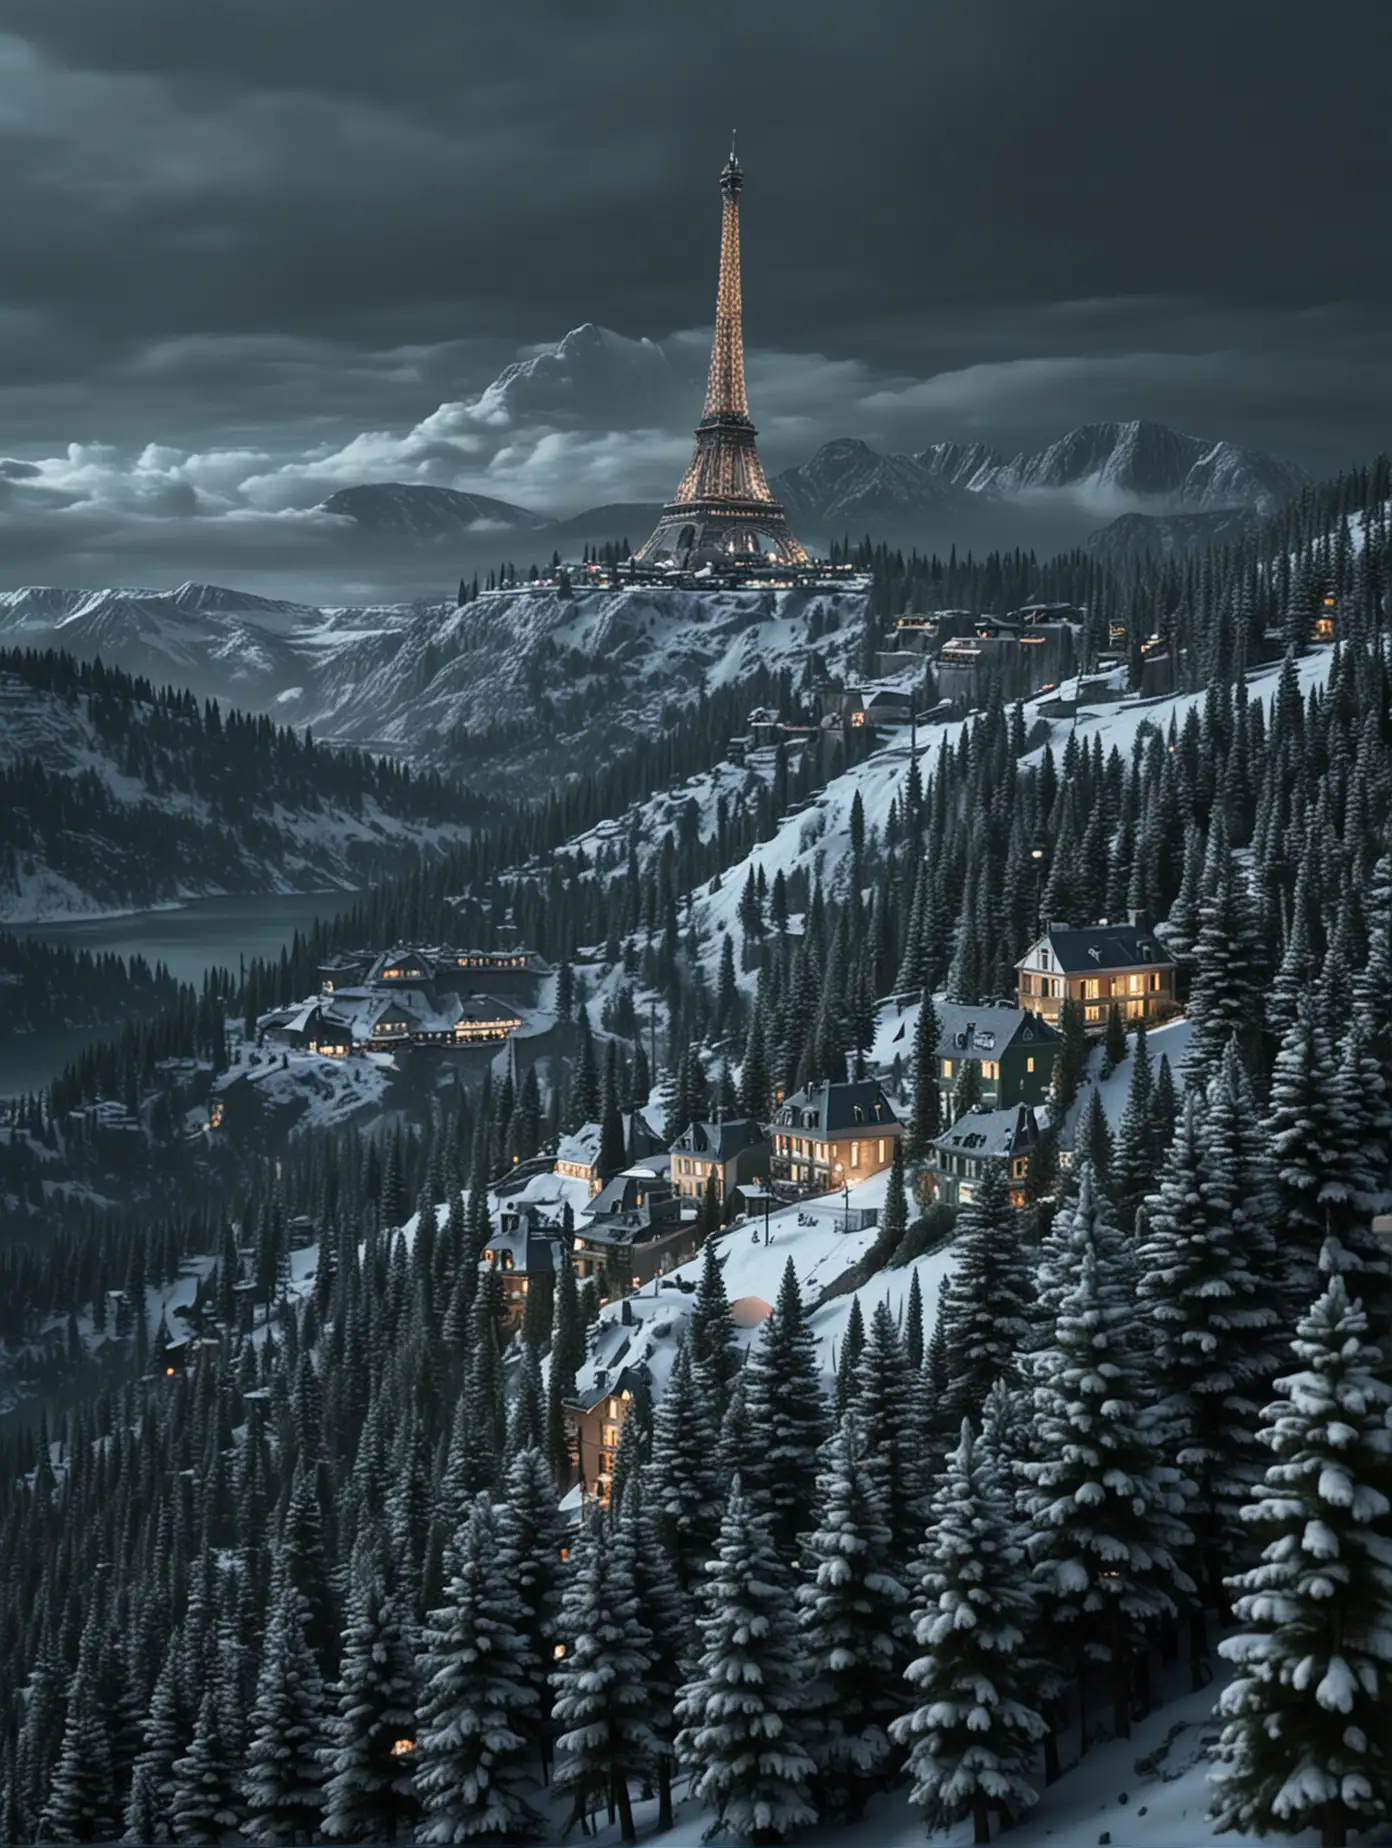 Snow Mountain Landscape with Lighted Houses and Eiffel Tower in Dusk